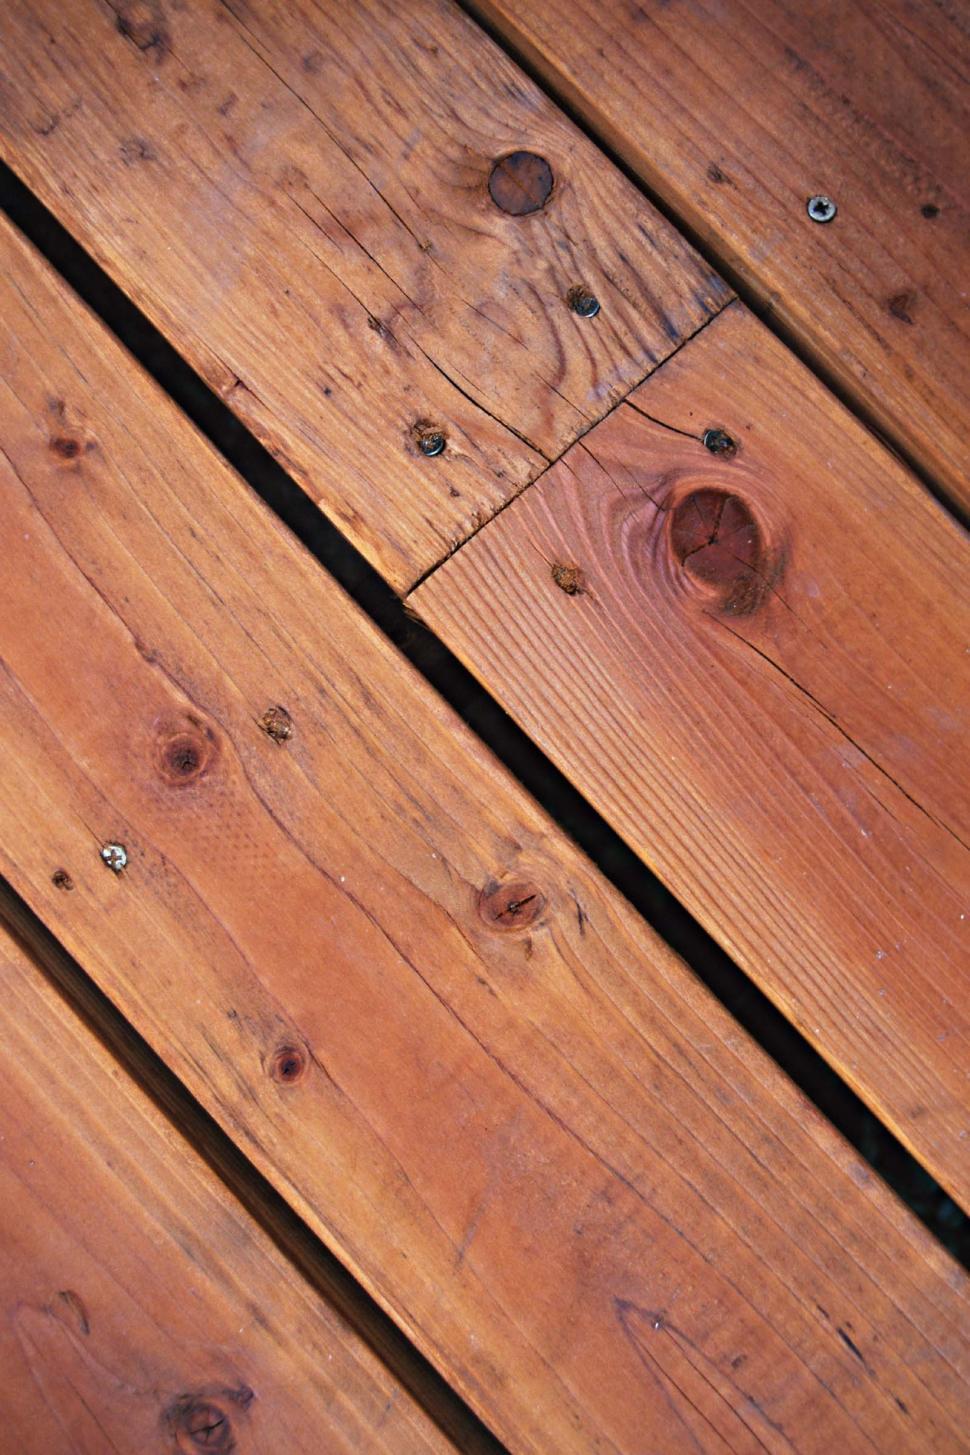 Free Image of wood texture background knotty screws planks deck lumber 